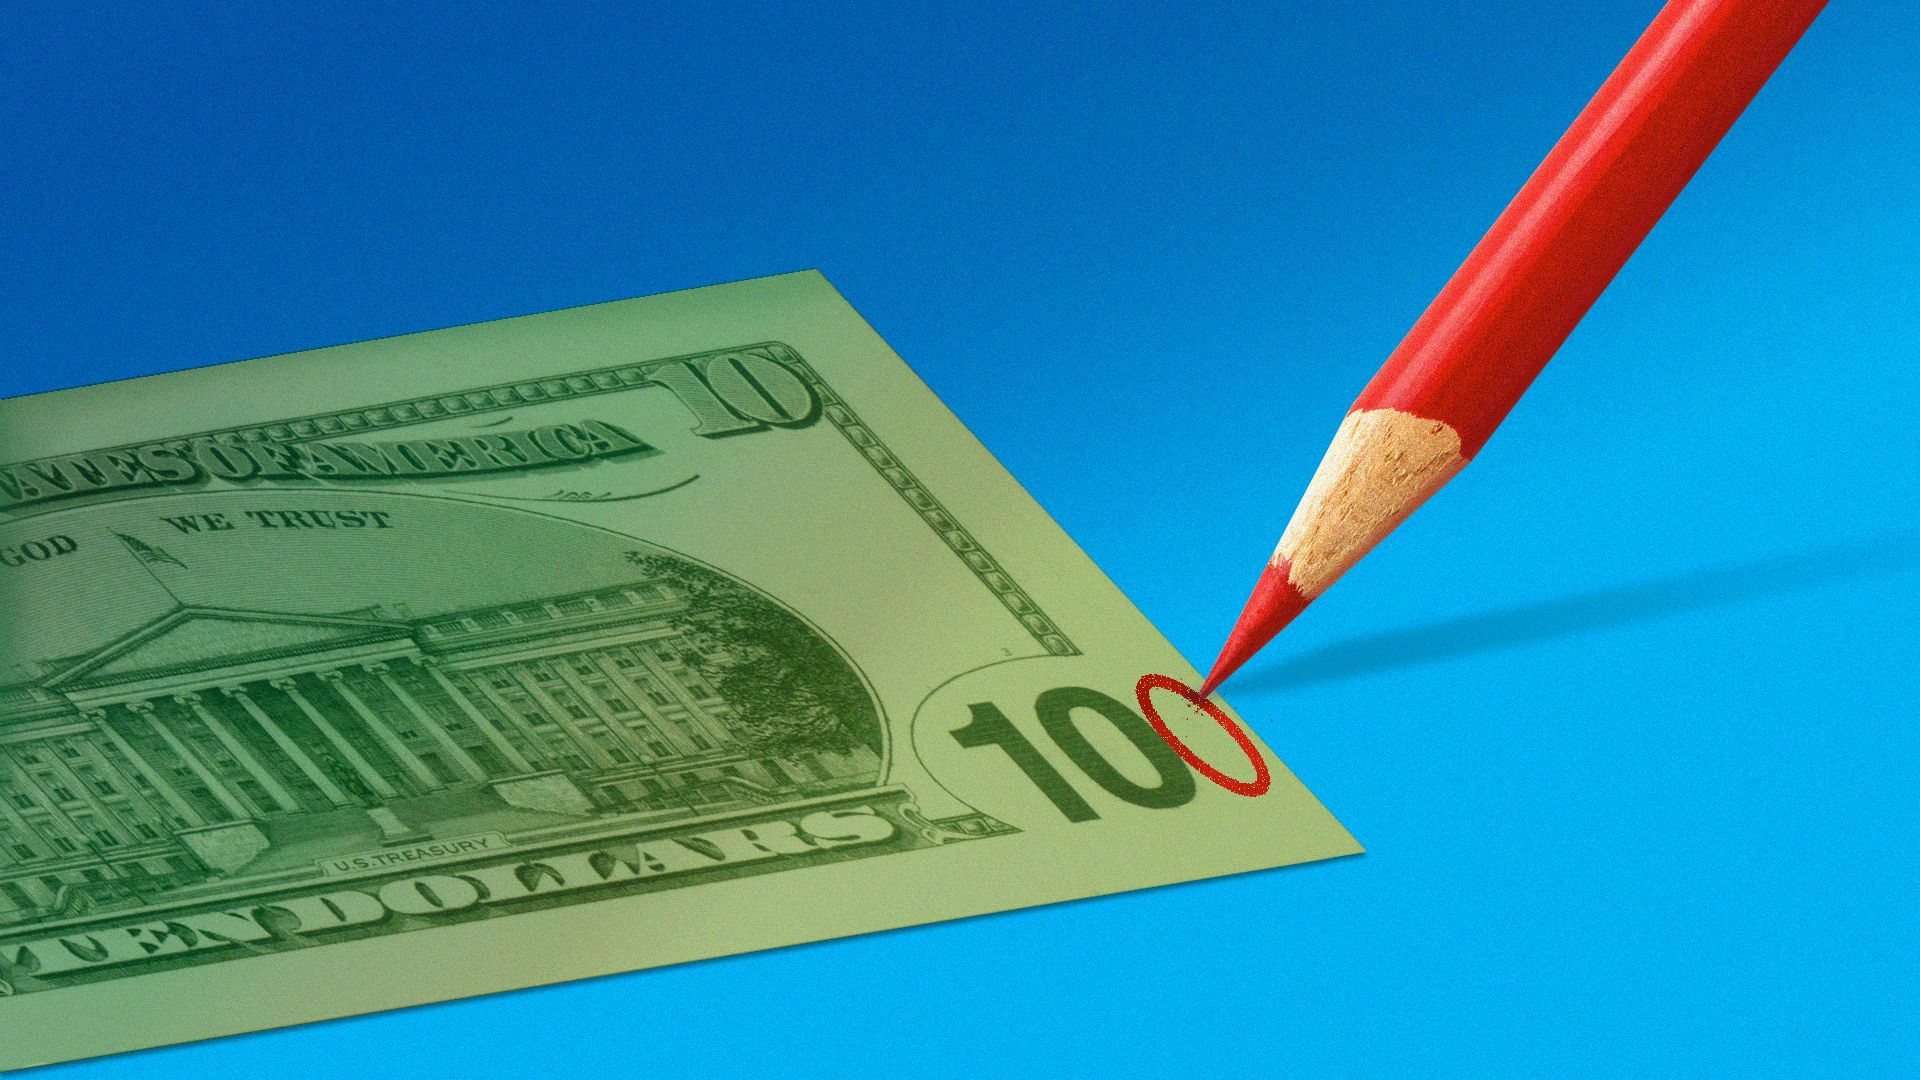 Image of a red pencil adding an additional "0" to a 10 dollar bill.